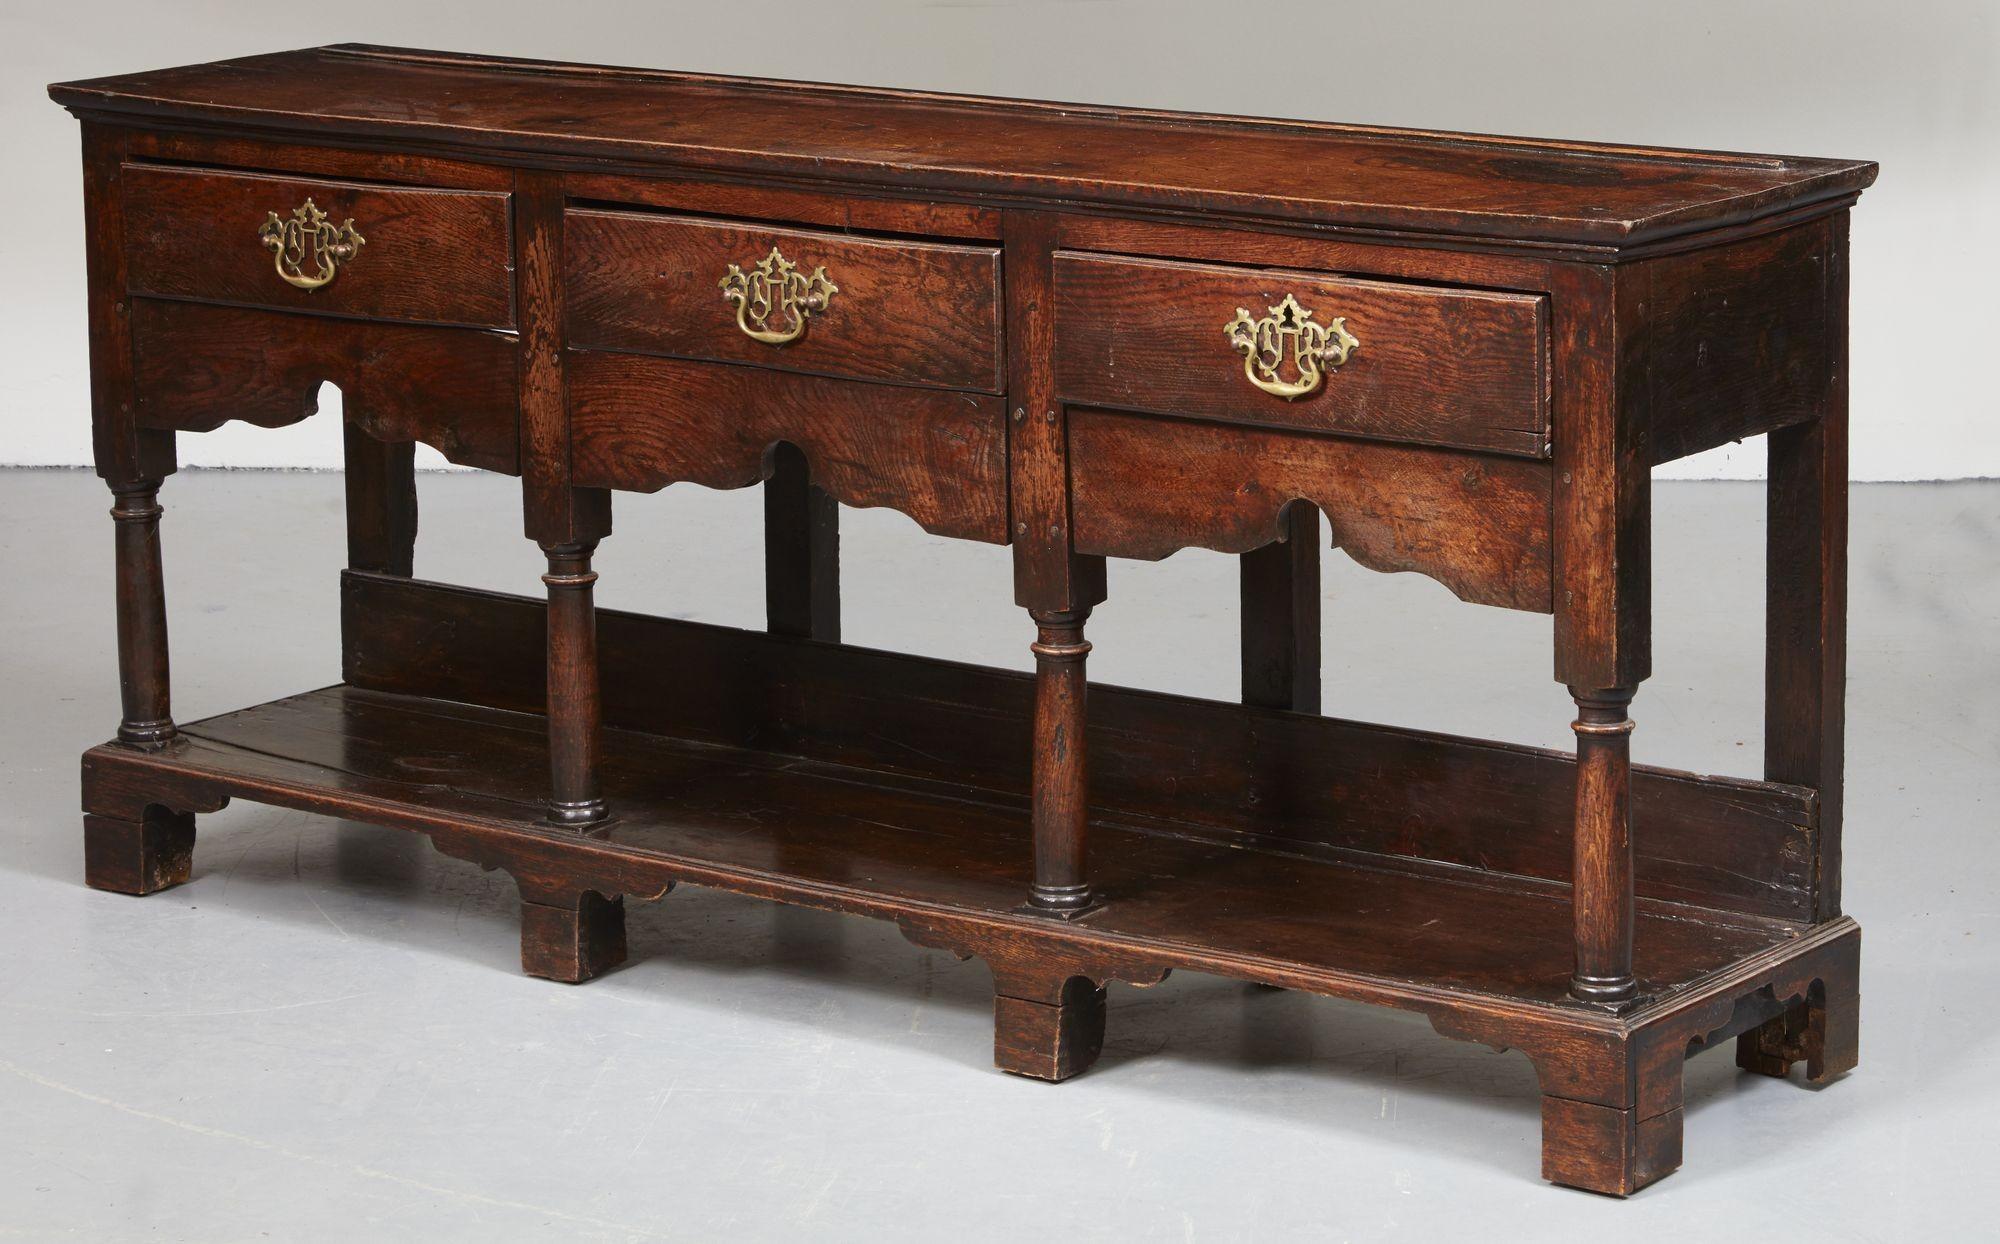 18th c. English Low Dresser with Potboard Base In Good Condition For Sale In Greenwich, CT